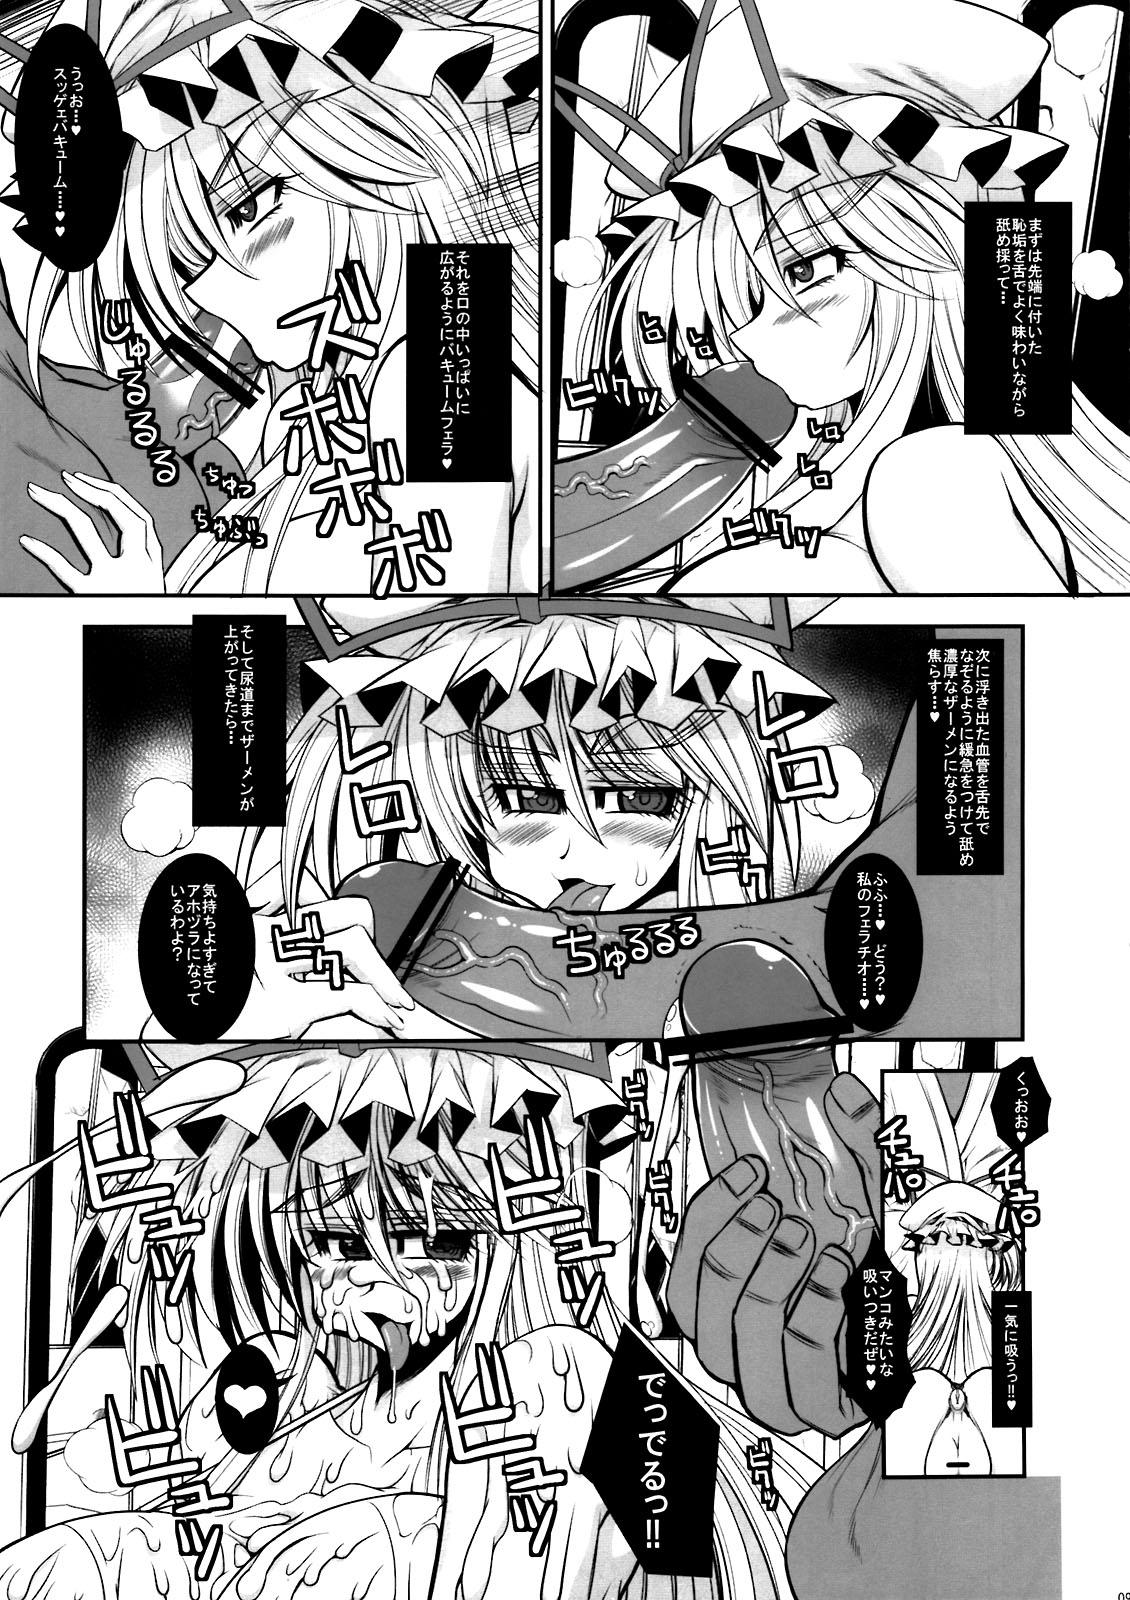 Tittyfuck Babar Zone - Touhou project Amateurs Gone - Page 9